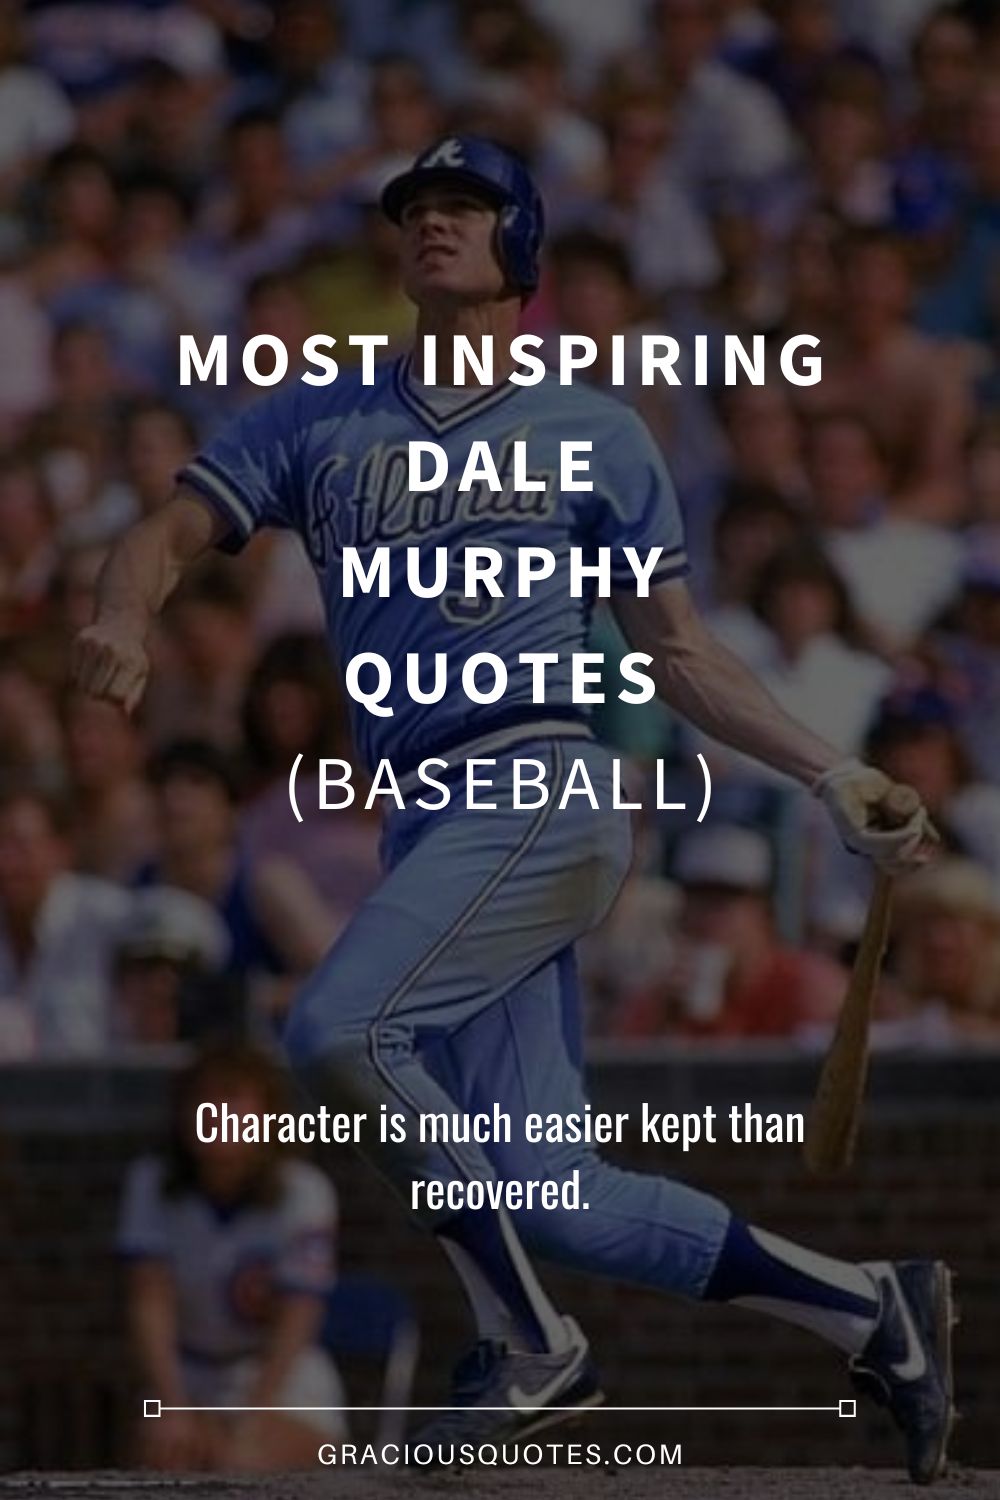 Most Inspiring Dale Murphy Quotes (BASEBALL) - Gracious Quotes